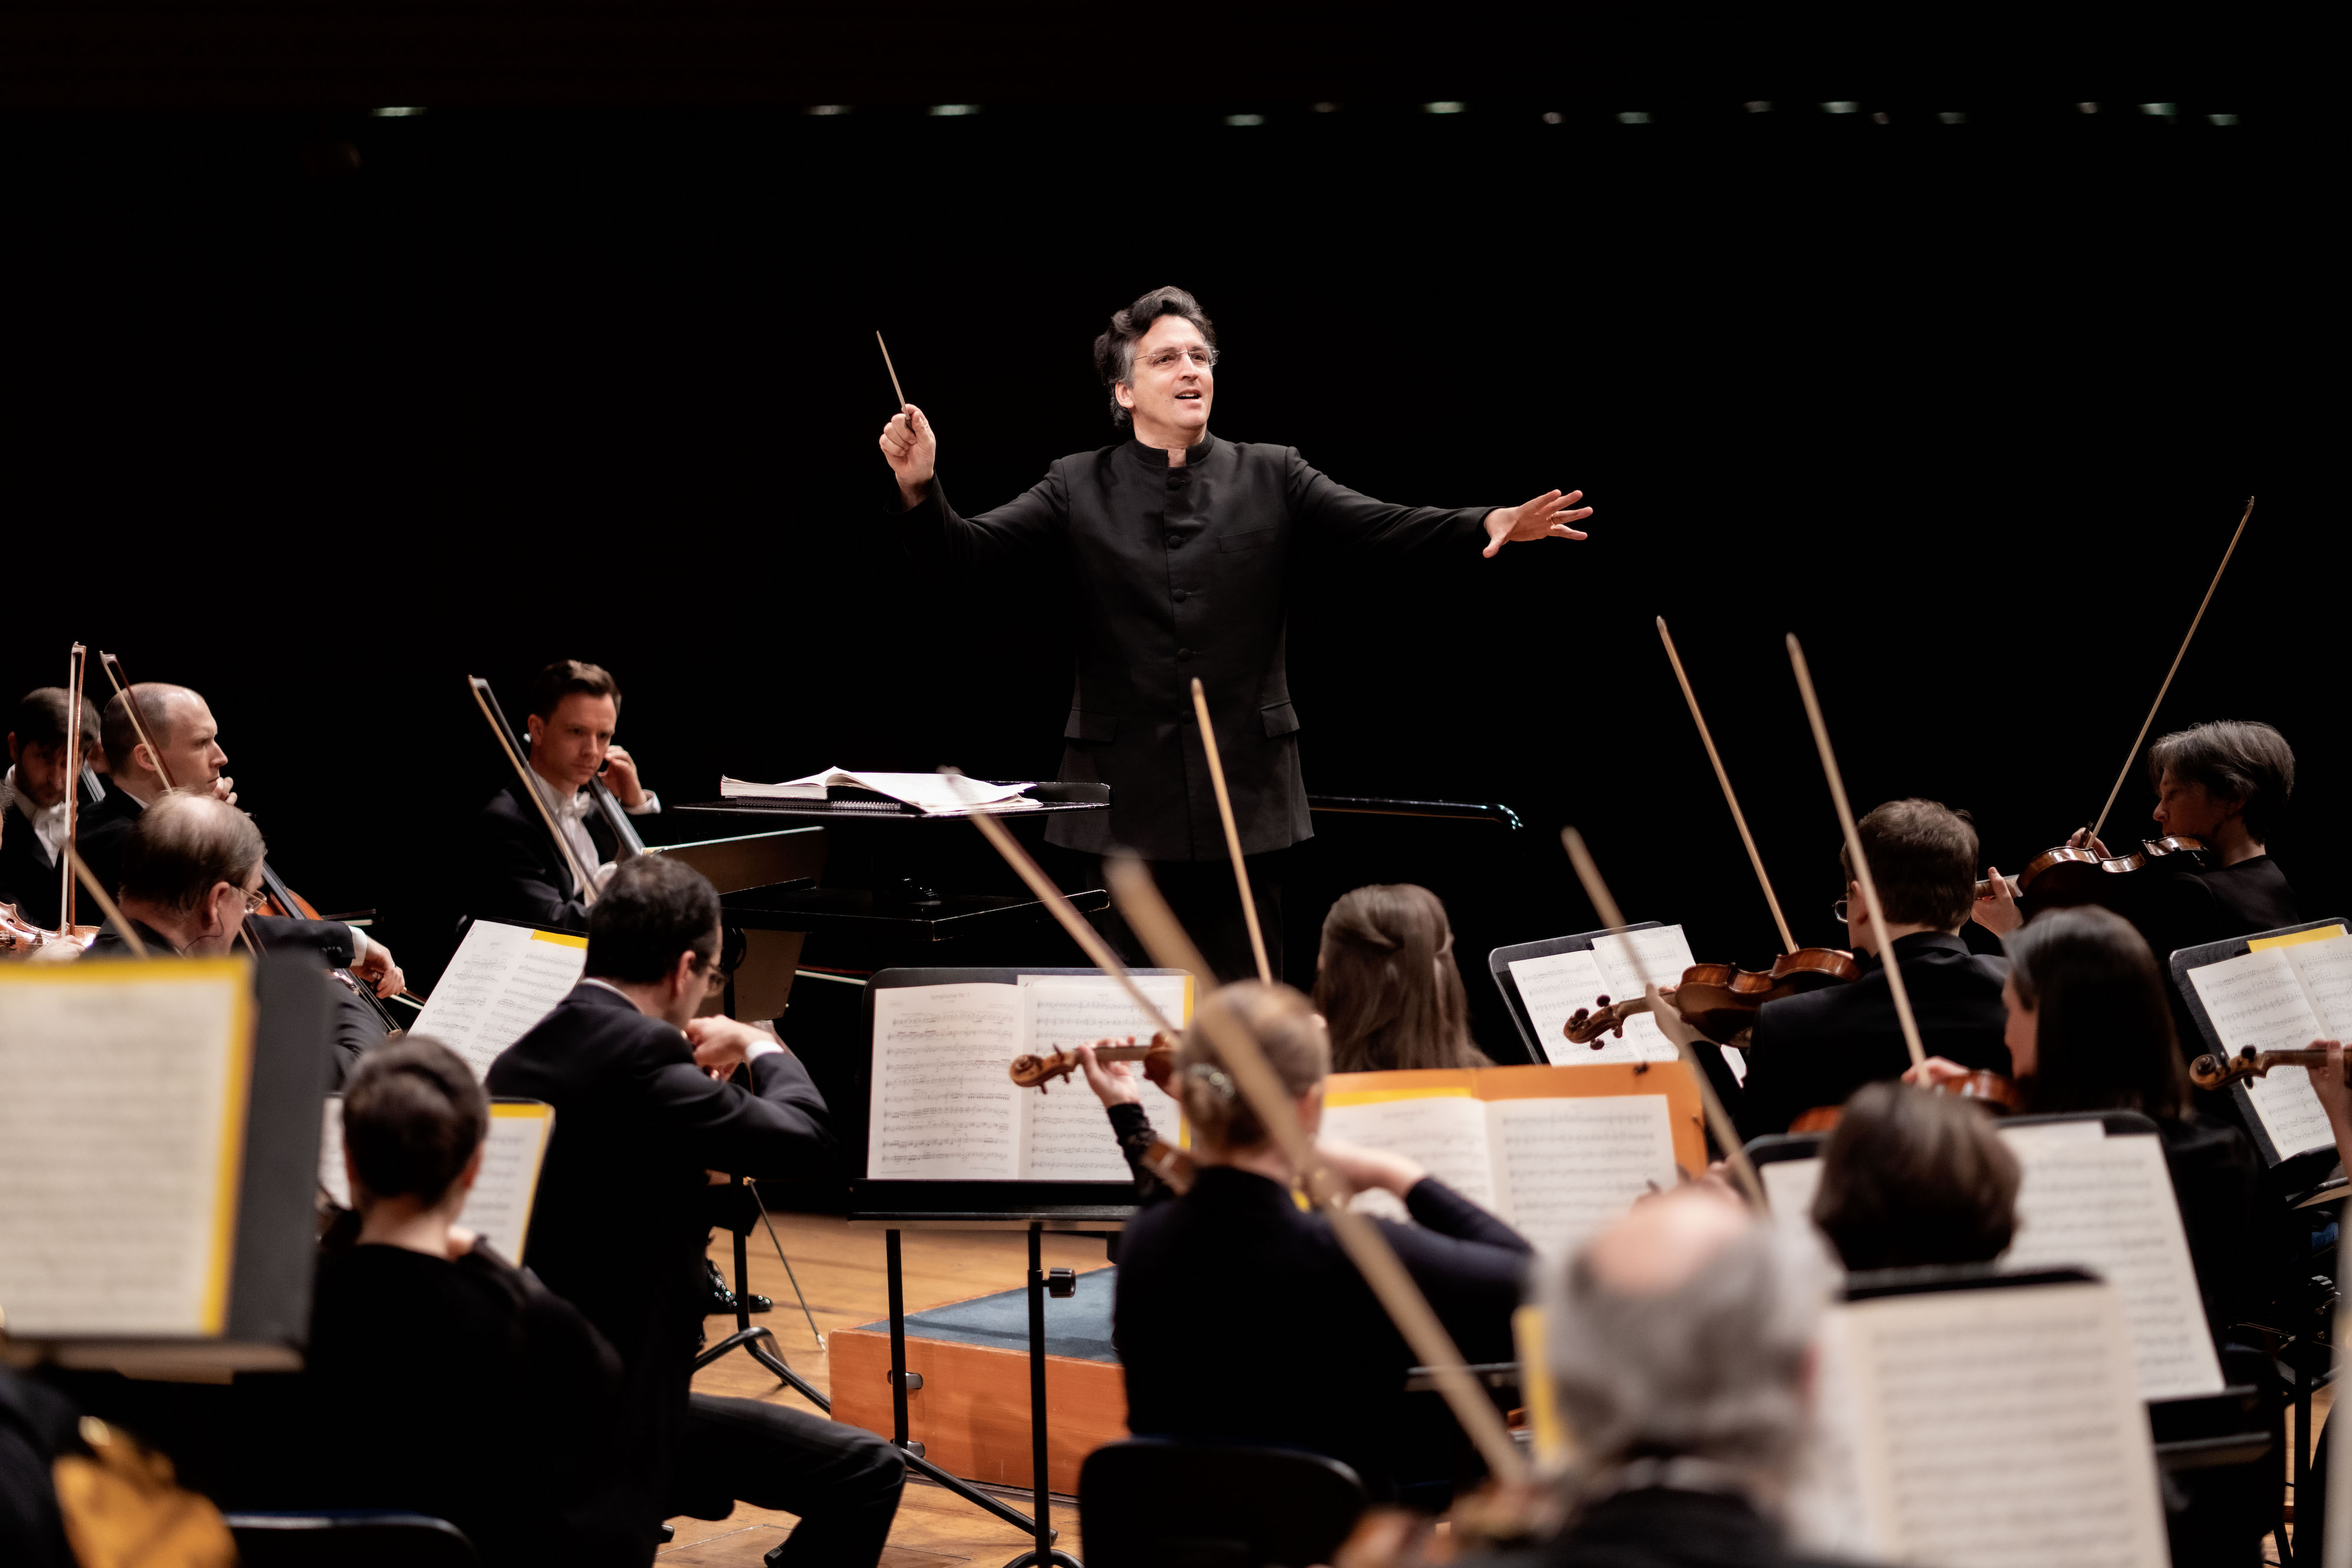 Maestro Sanderling: "The Lucerne Symphony Orchestra is an El Dorado for every chief conductor"